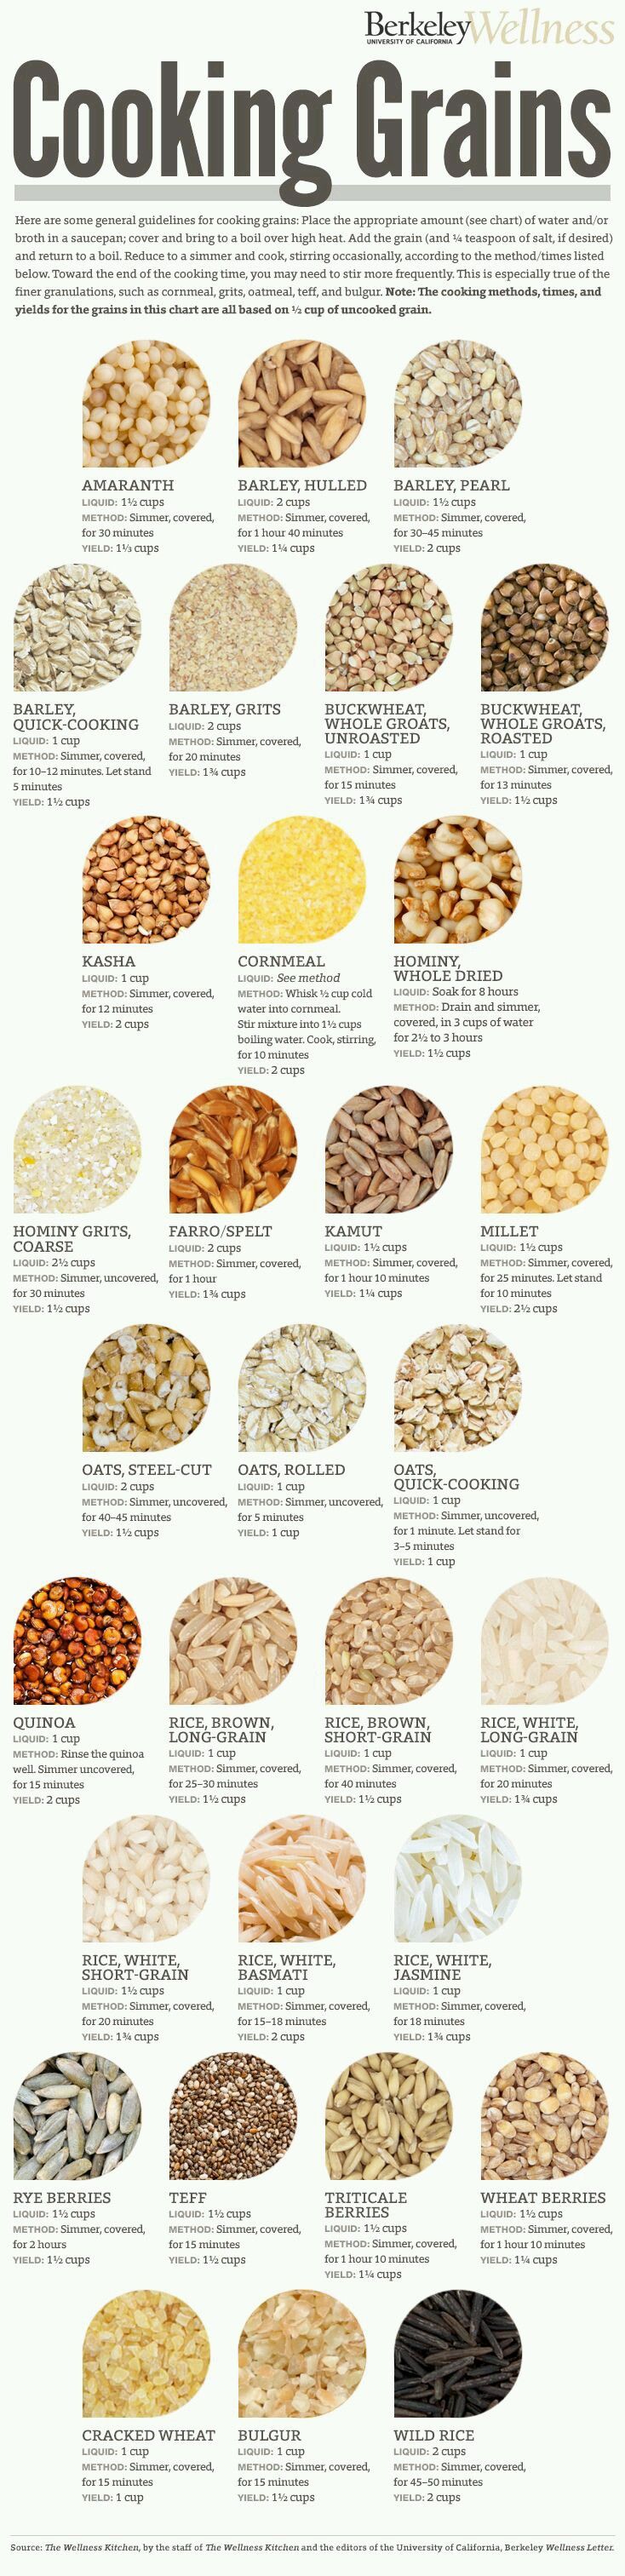 Life-Saving Guide To Cooking All Kinds Of Grains Infographic